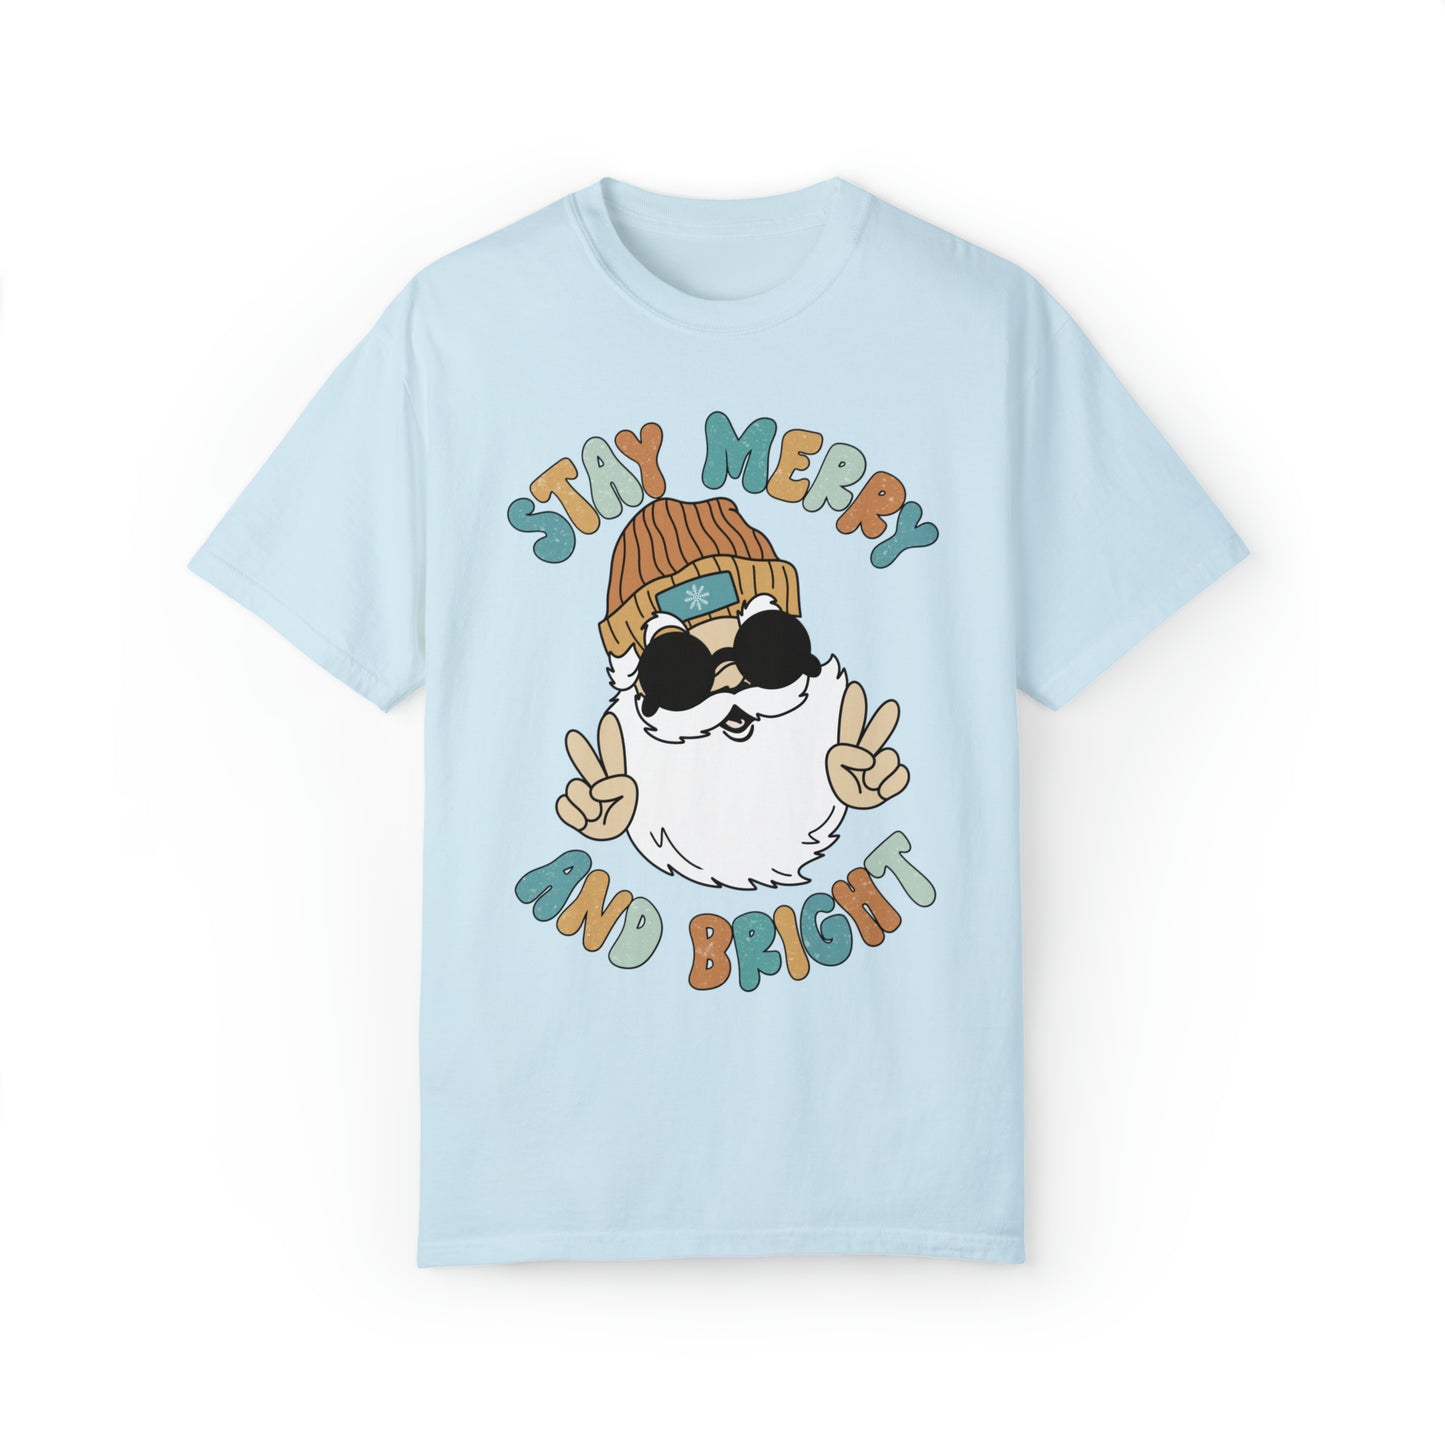 Stay Merry and Bright Shirt